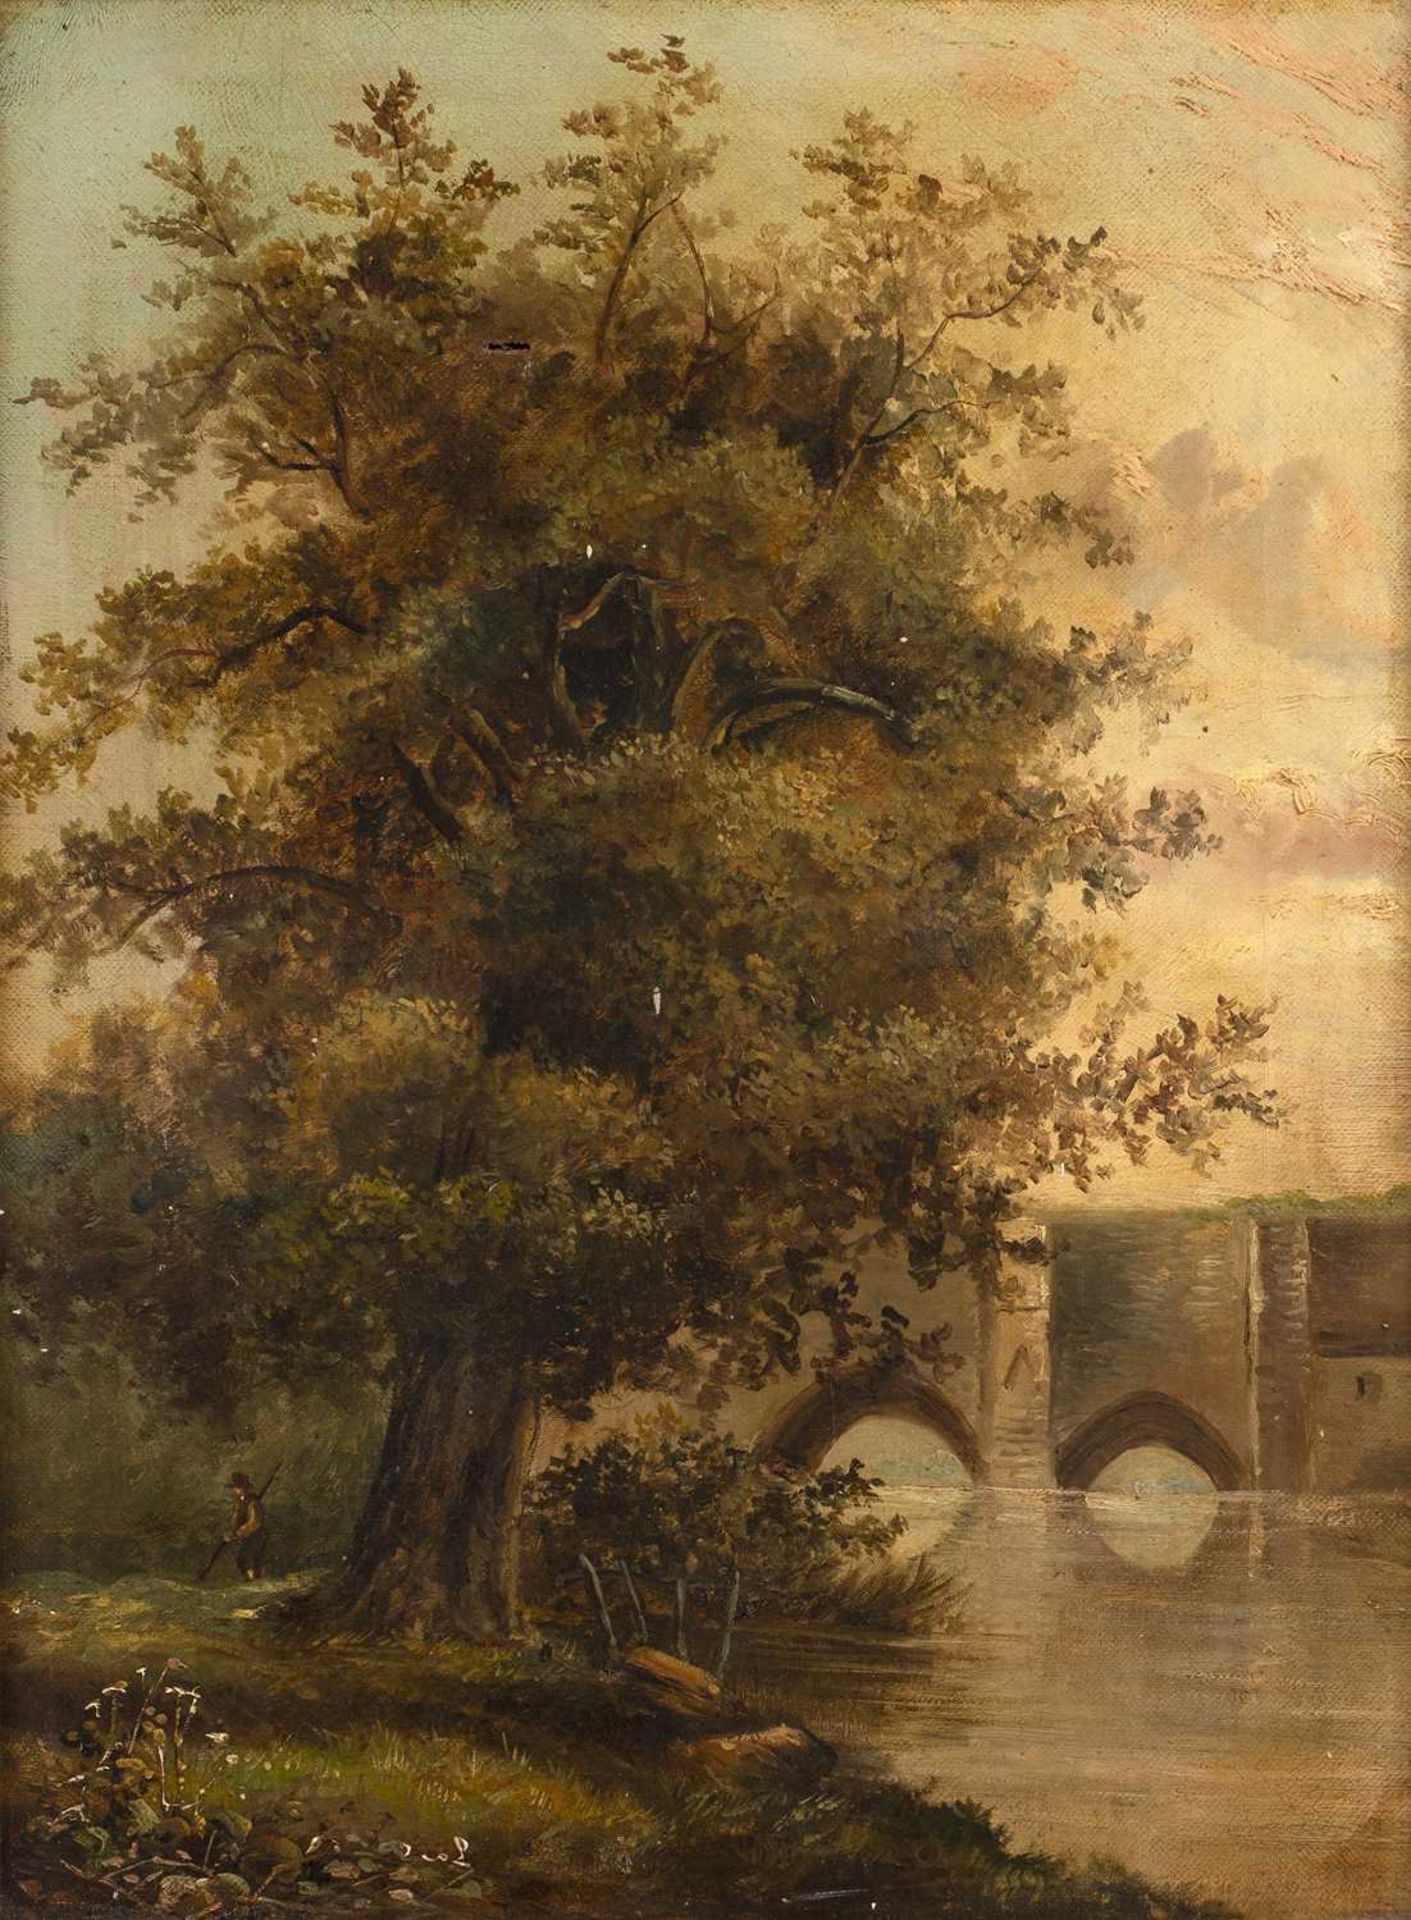 Late 19th/early 20th Century English School 'Study of a figure in a river landscape', oil on canvas,